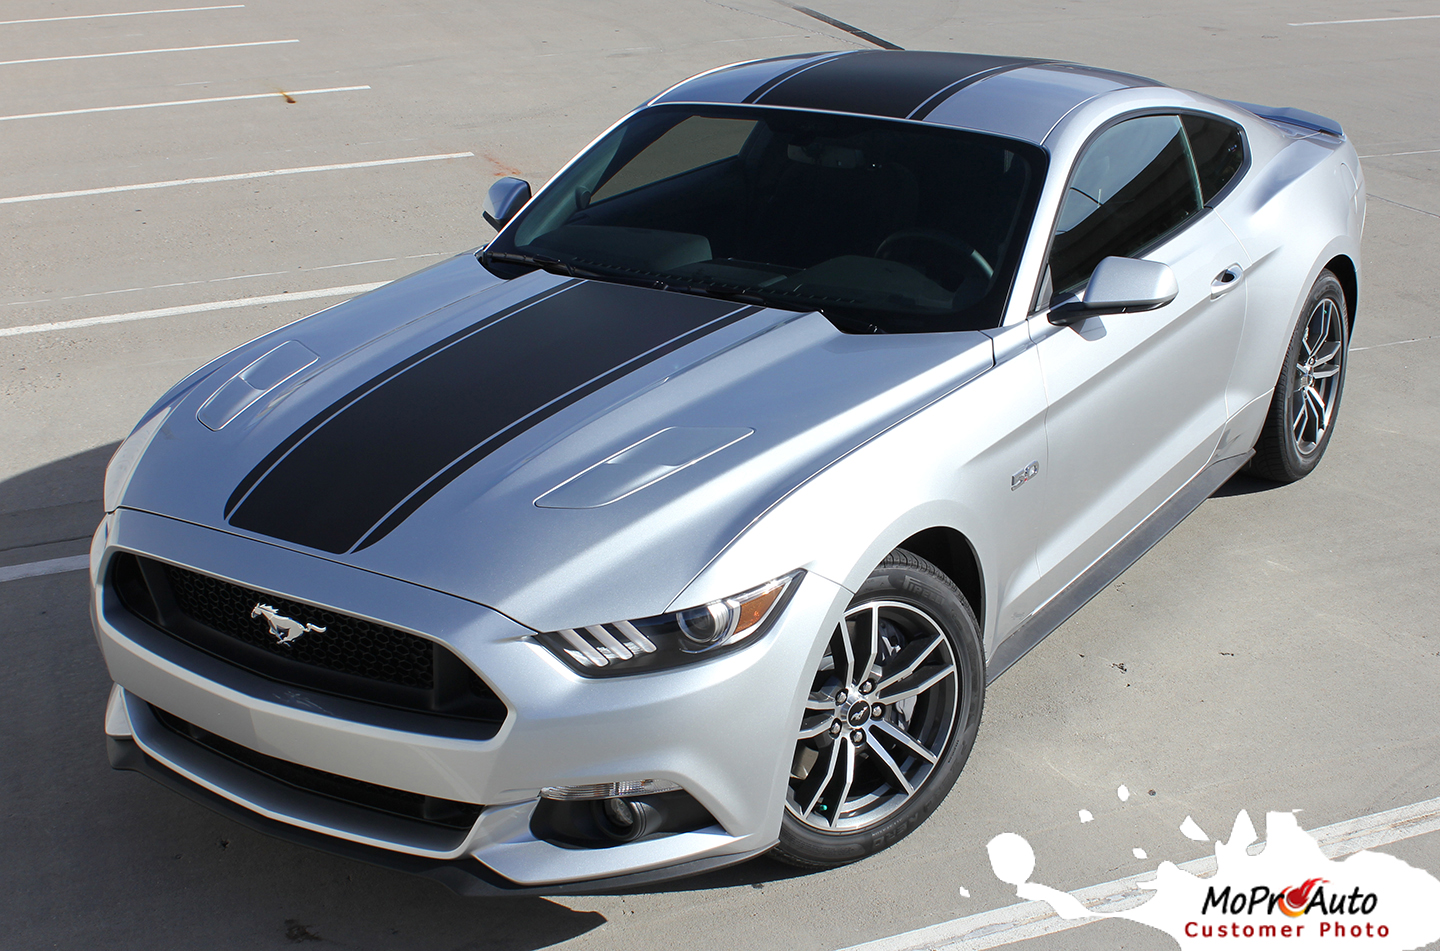 2015 2016 2017 MEDIAN : Ford Mustang 2015+ MoProAuto Pro Design Series Vinyl Graphics and Decals Kit